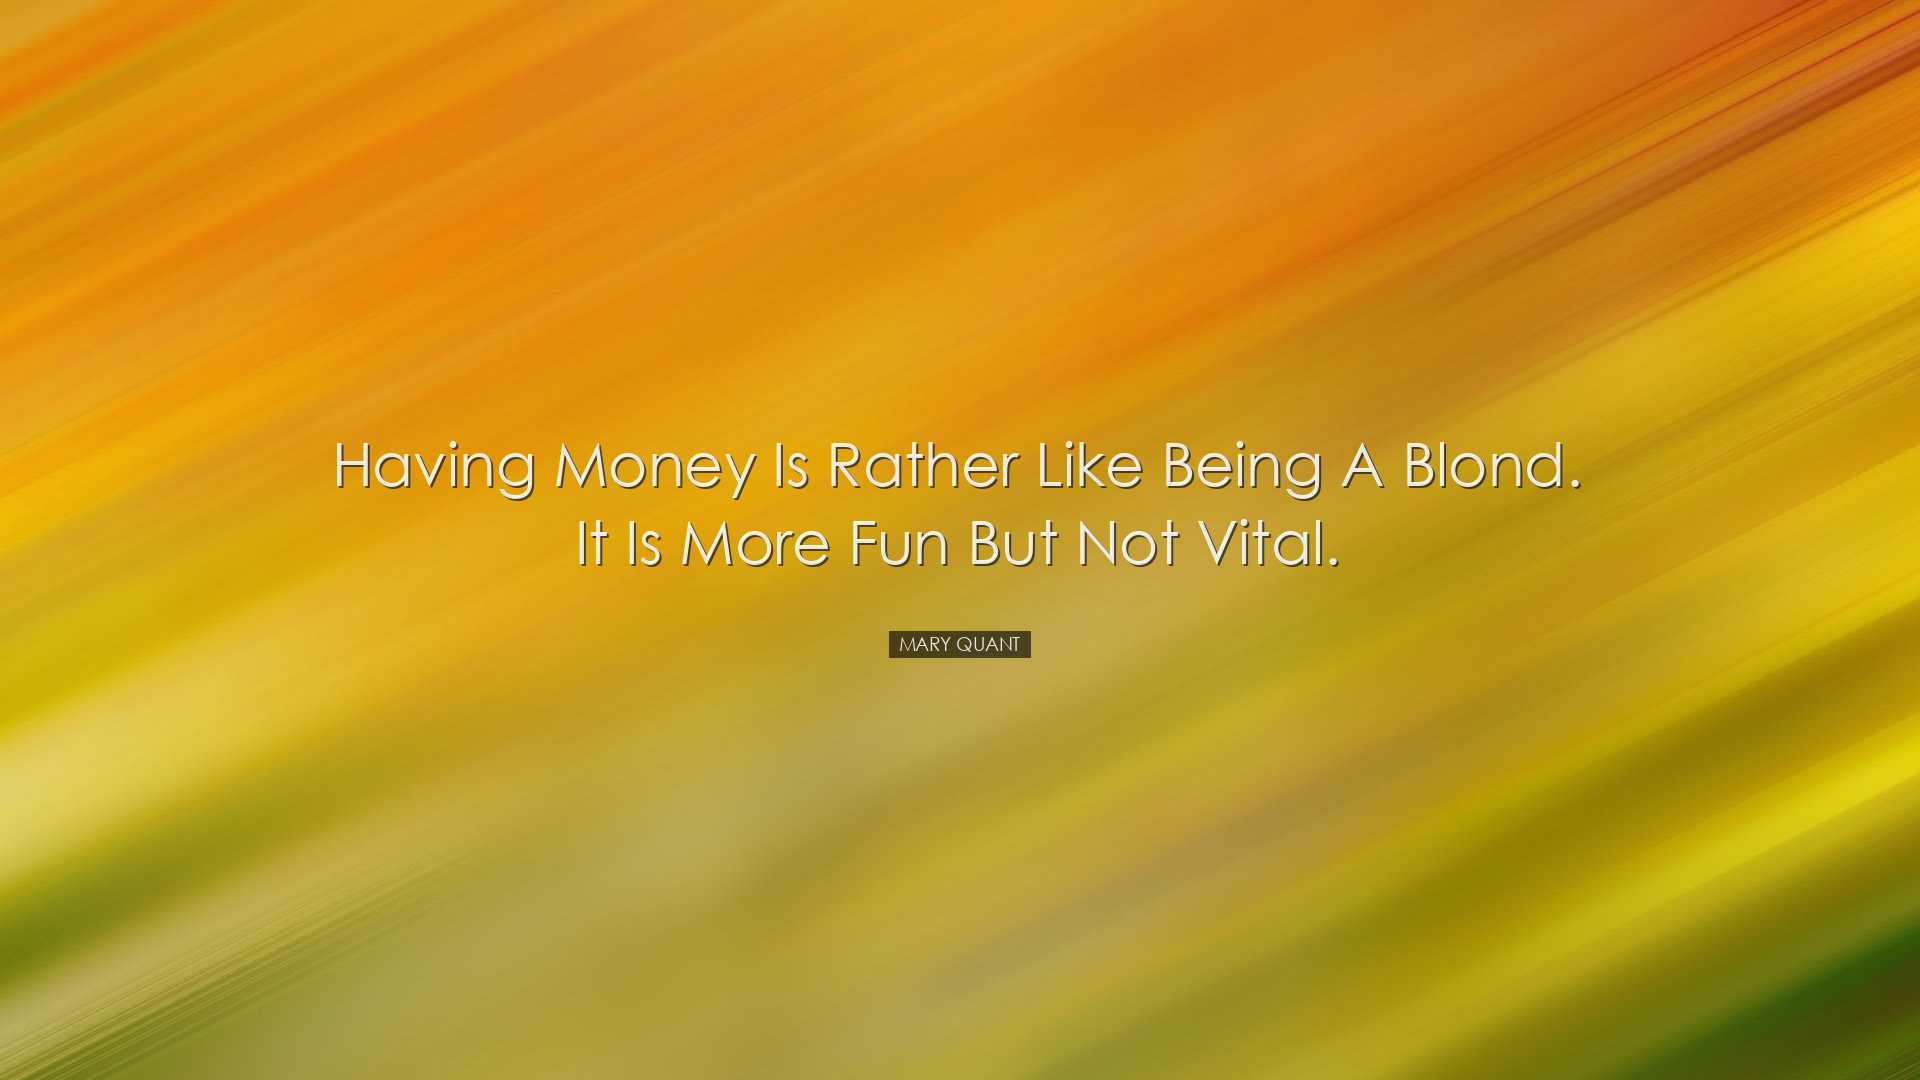 Having money is rather like being a blond. It is more fun but not